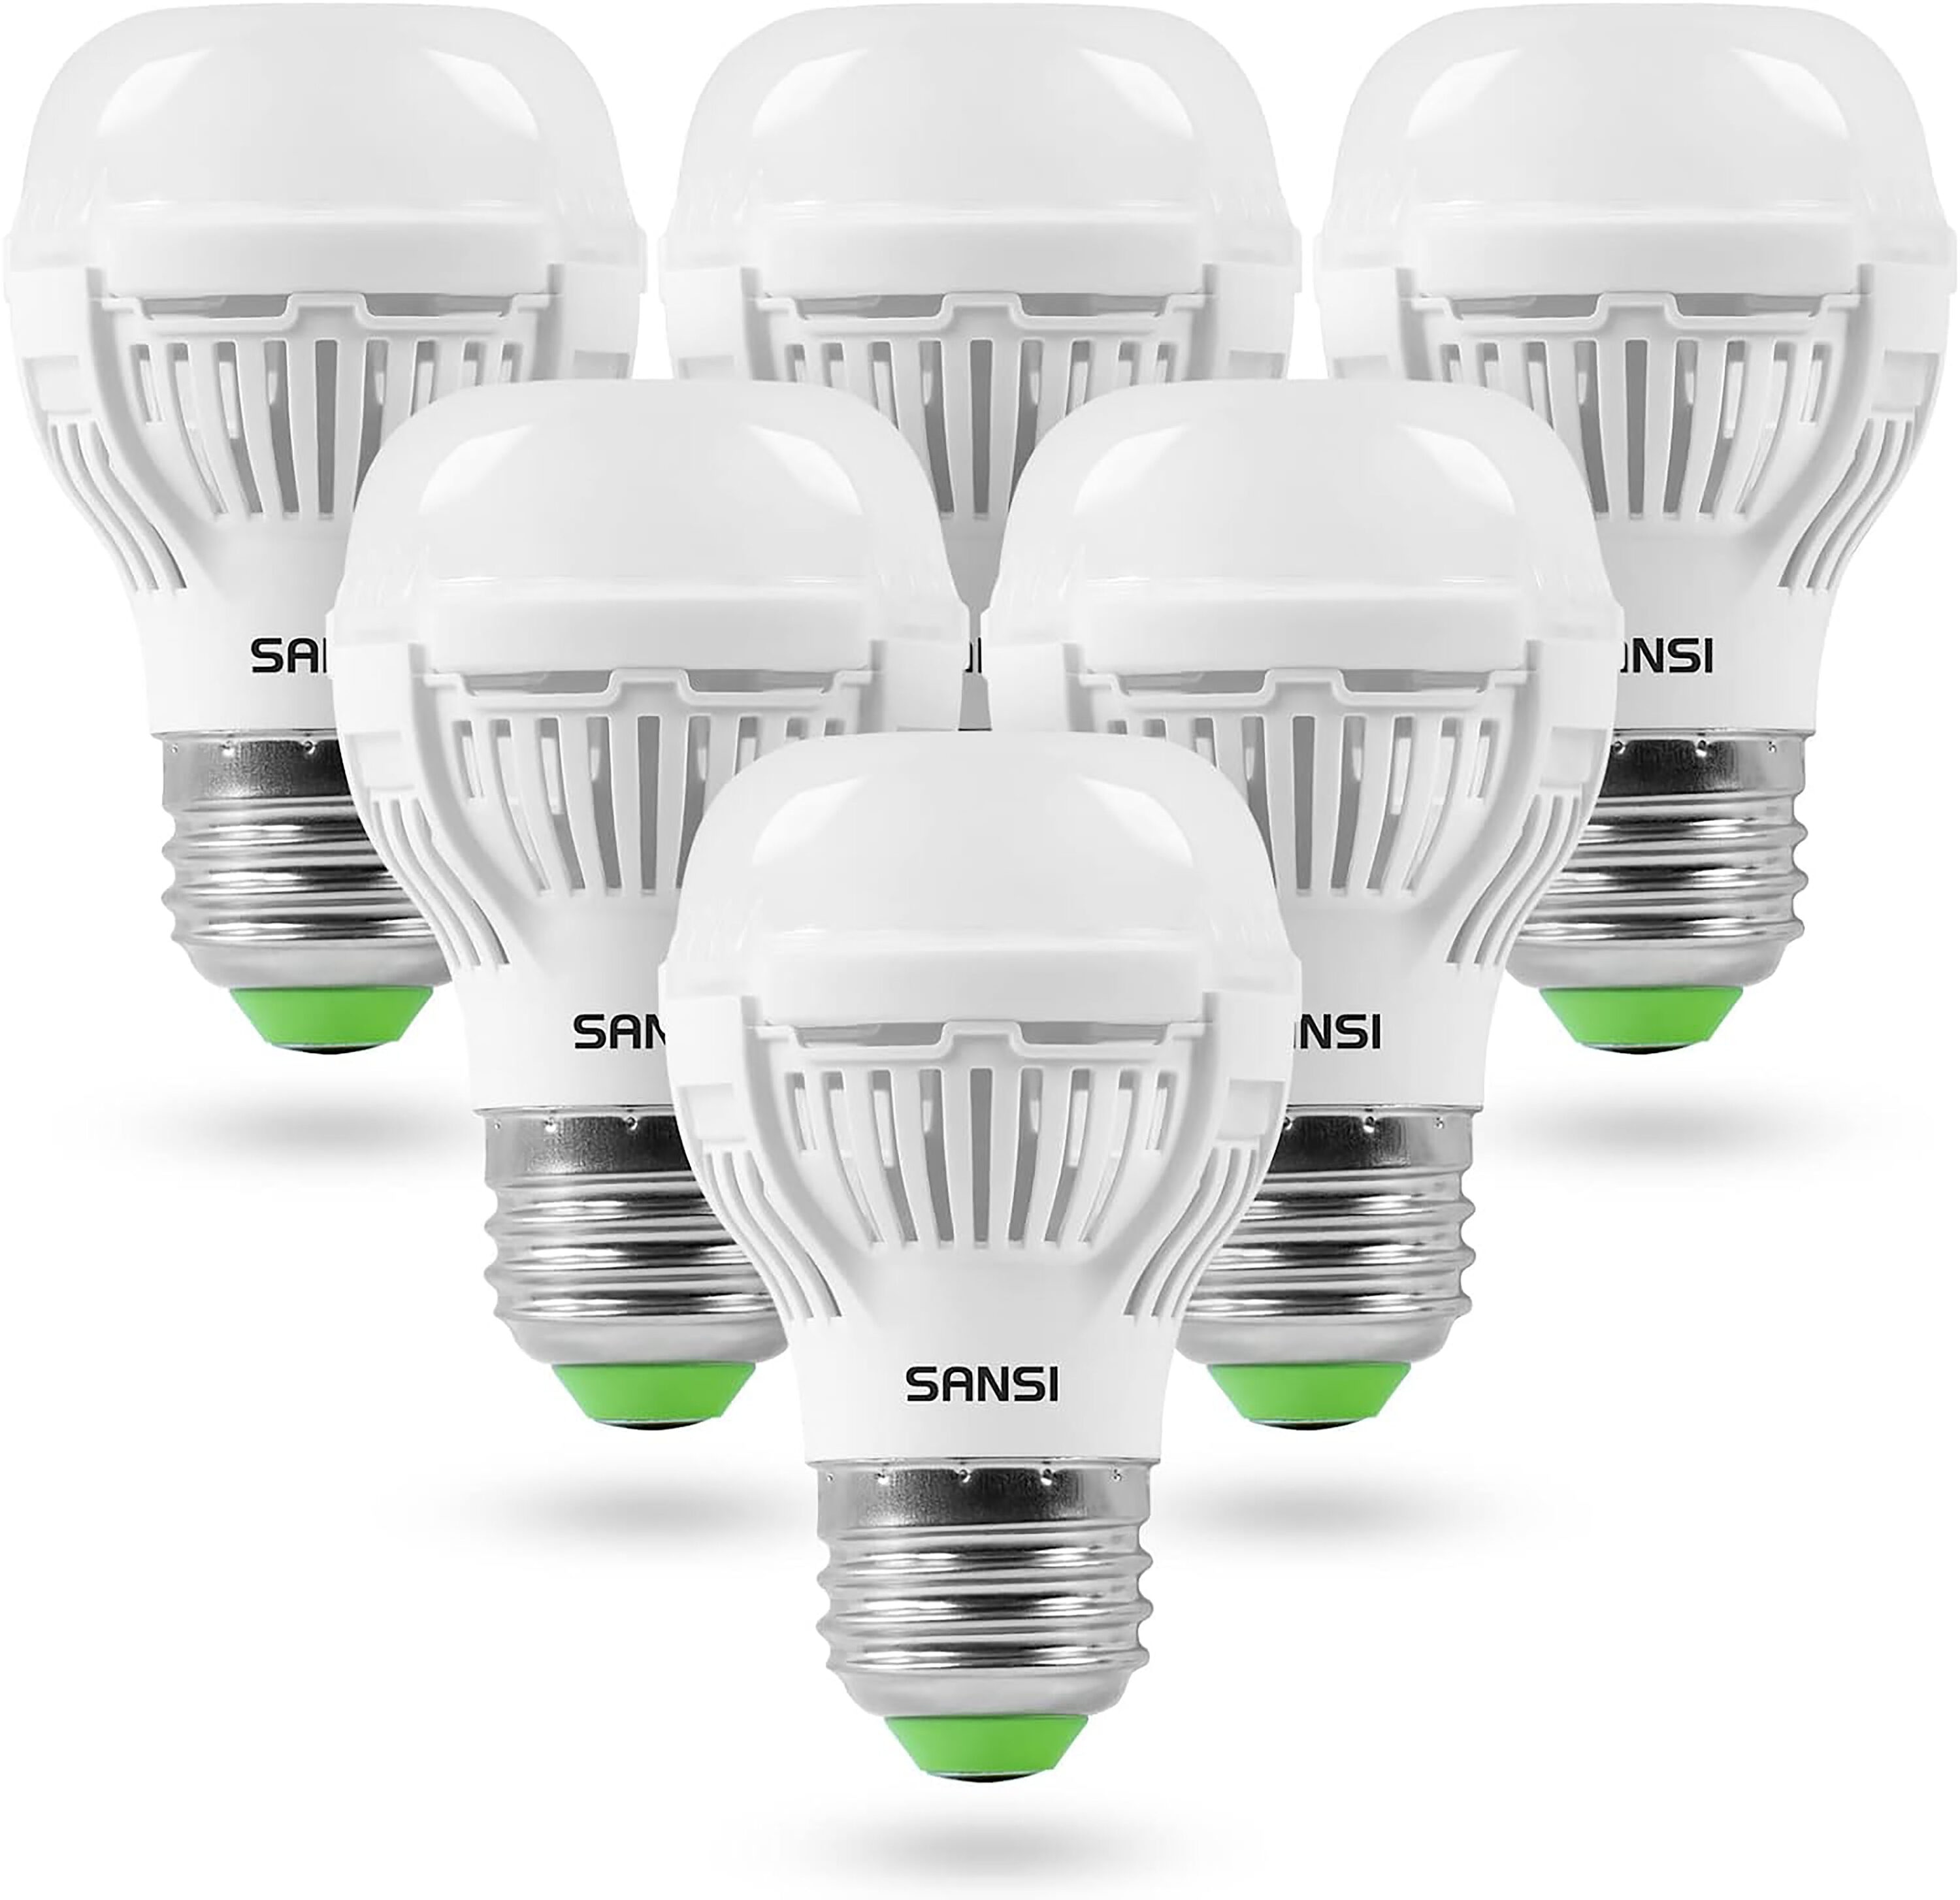 aan de andere kant, Fictief Ja SANSI SANSI 60W Equivalent LED Light Bulbs, 6 Pack 900 Lumens LED Bulb,  3000K Soft White 9W Non-Dimmable, E26, A15 Efficient, Safe Energy Saving  for Home Lighting in the General Purpose LED